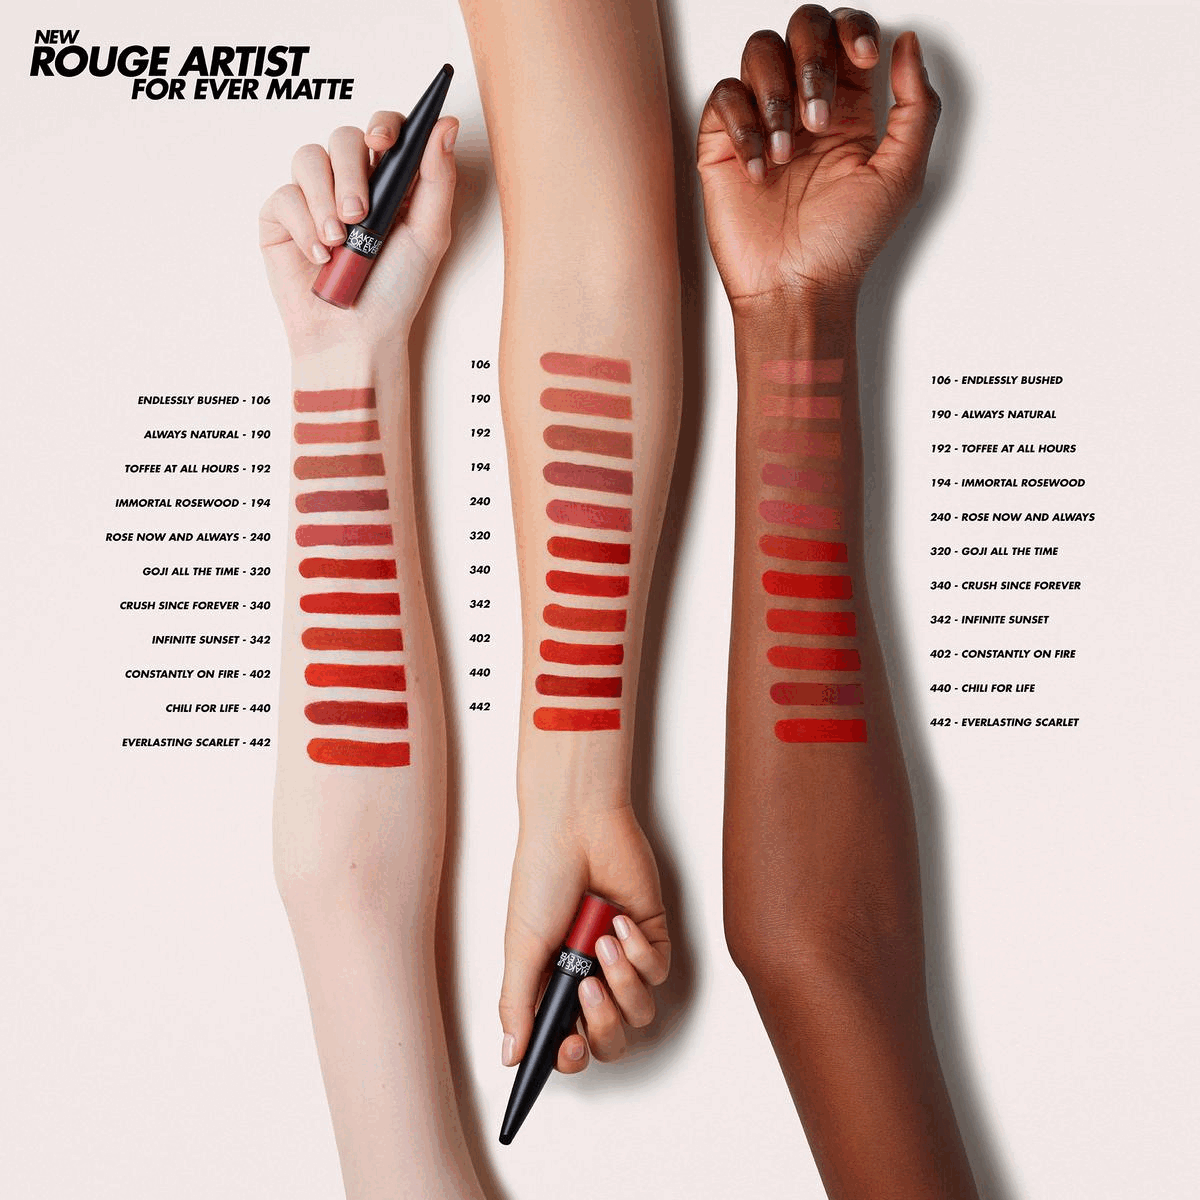 Image 1, the rouge artist forever matte lipstick swatches. Image 2, shades on models